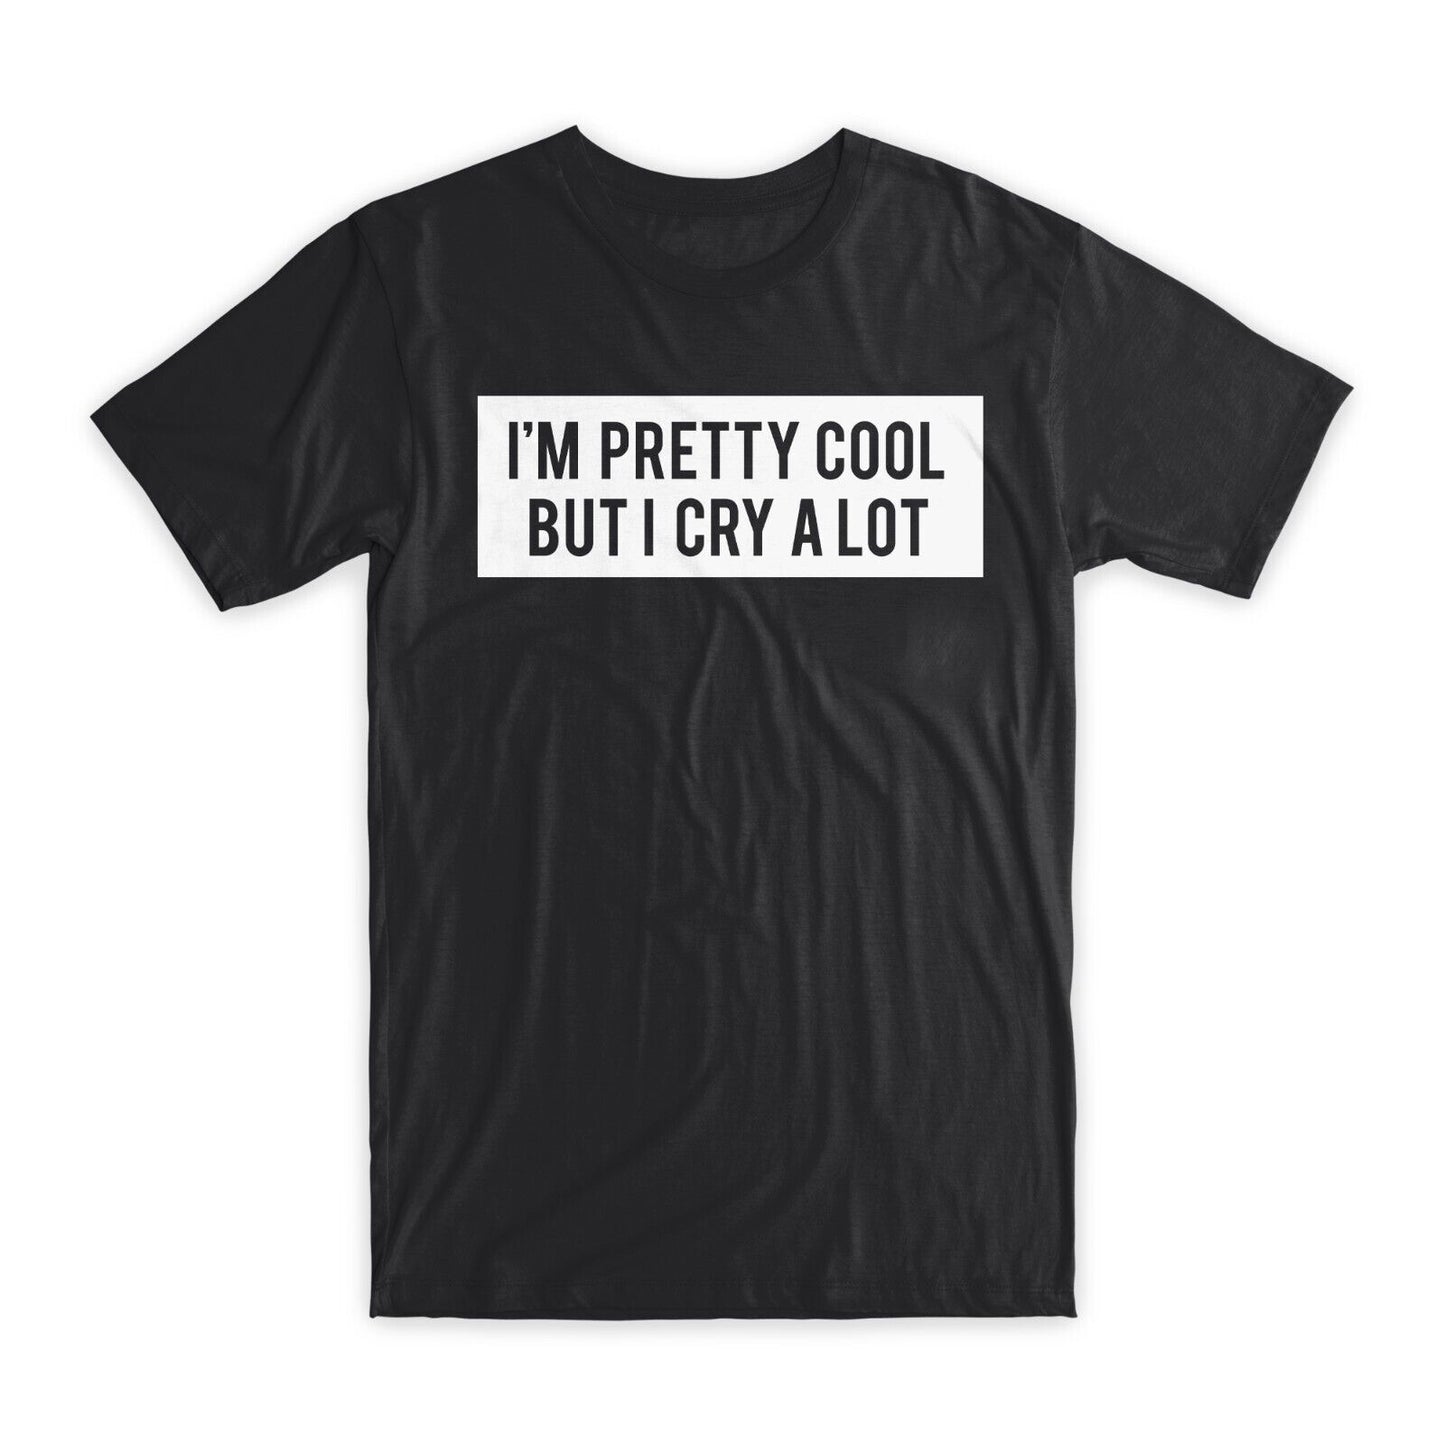 I'm Pretty Cool But I Cry A Lot T-Shirt Premium Soft Cotton Funny Tees Gift NEW